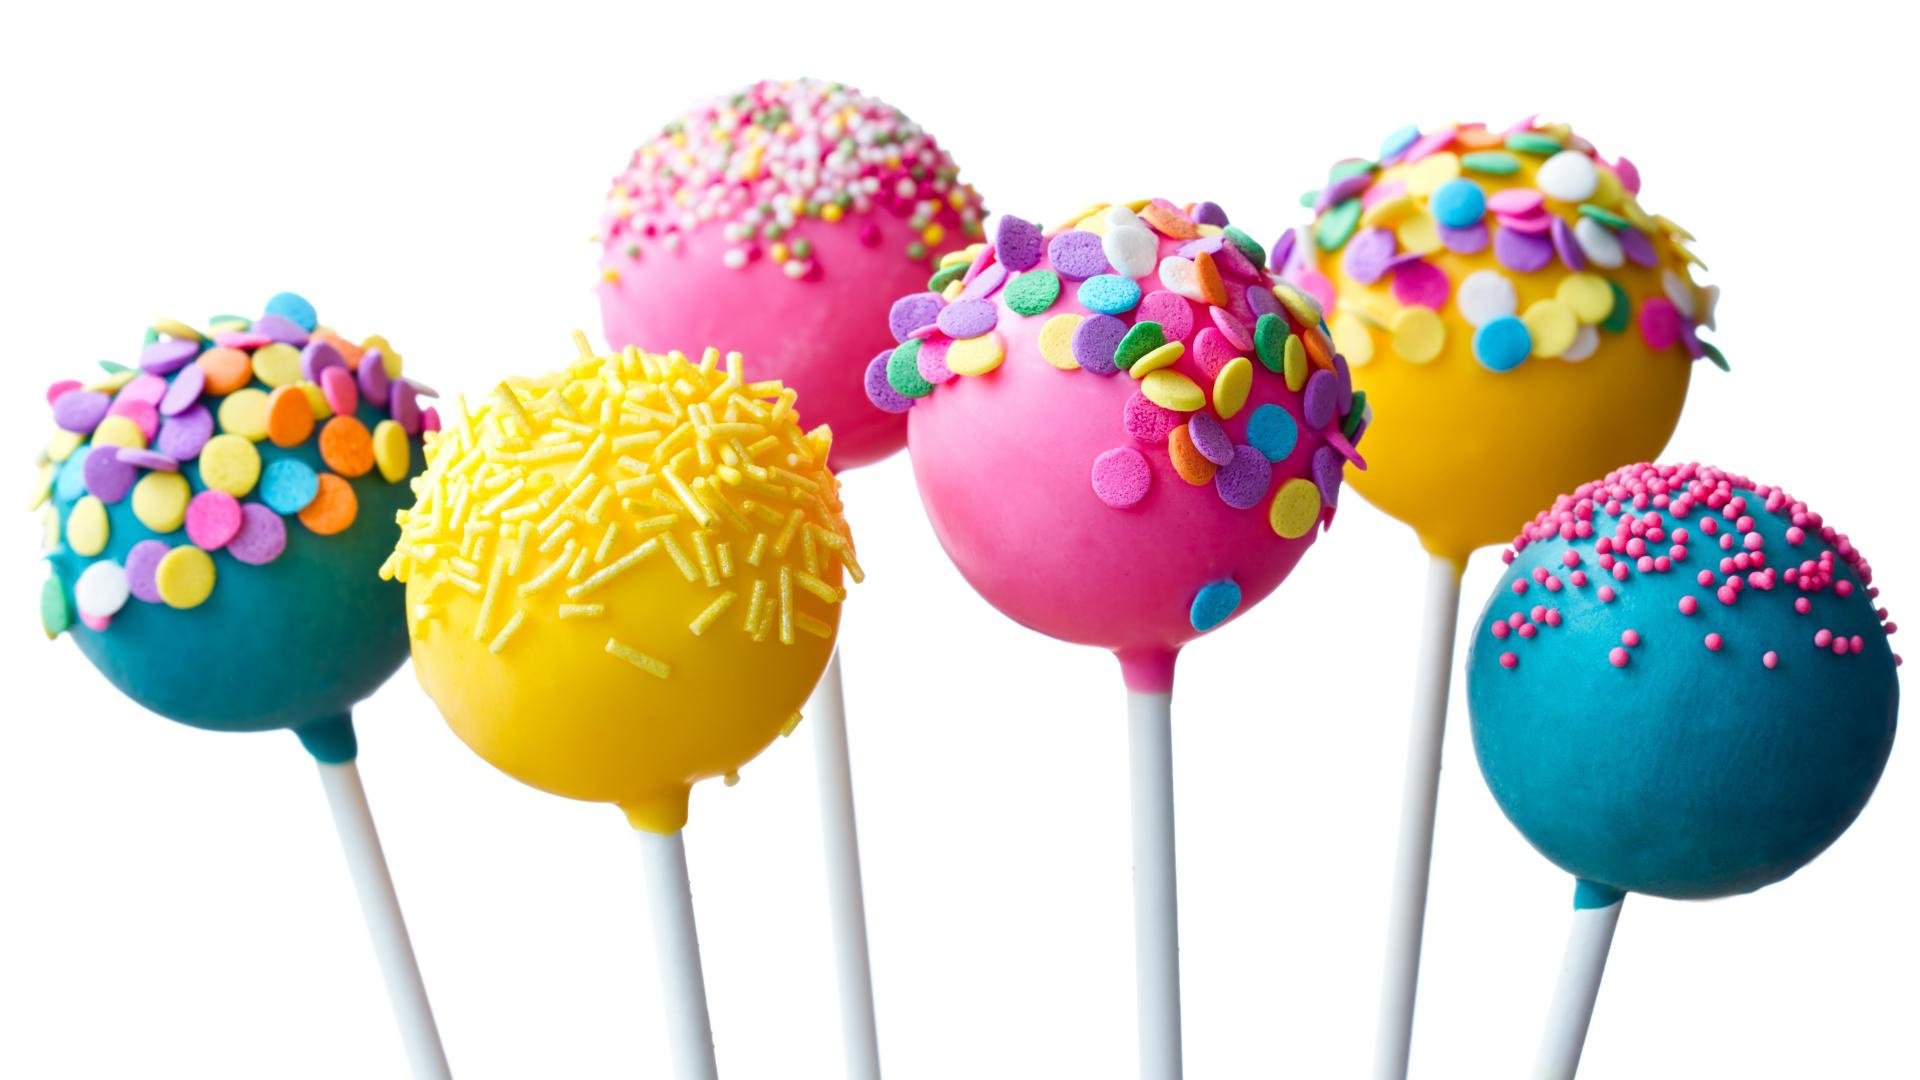 Galaxy Note 4 Lollipop Manual Appears, Shows Update Imminent